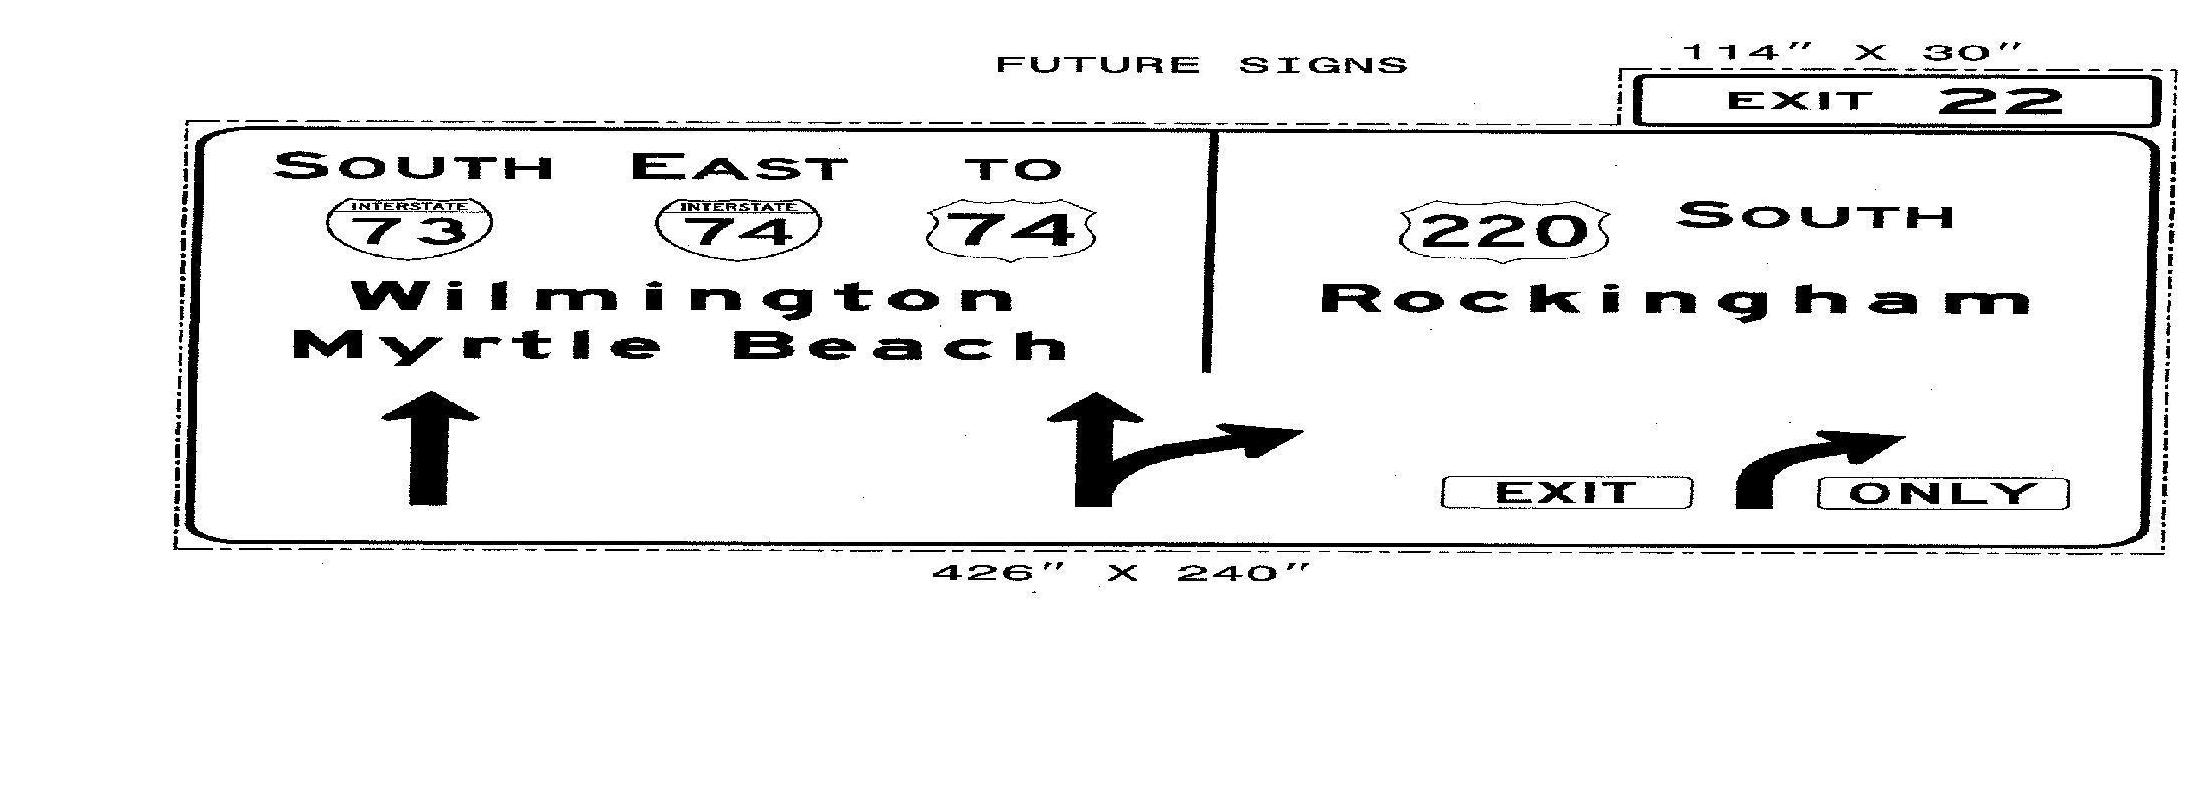 Image of previous NCDOT plan for US 220 exit sign at start of I-73/I-74 Rockingham Bypass from Dec. 2013